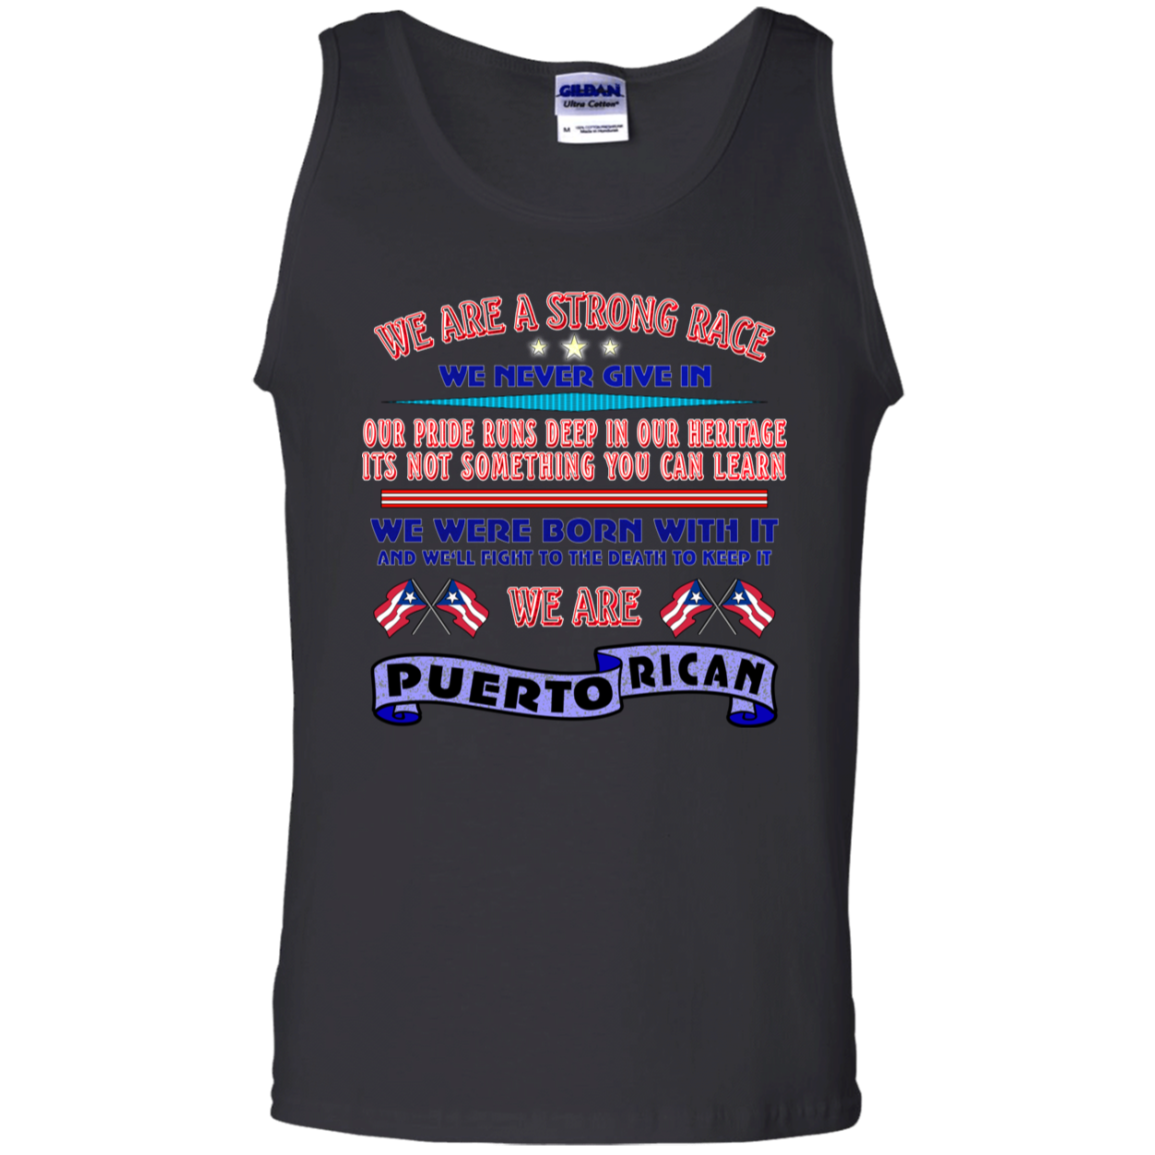 WE ARE Strong 100% Cotton Tank Top - Puerto Rican Pride